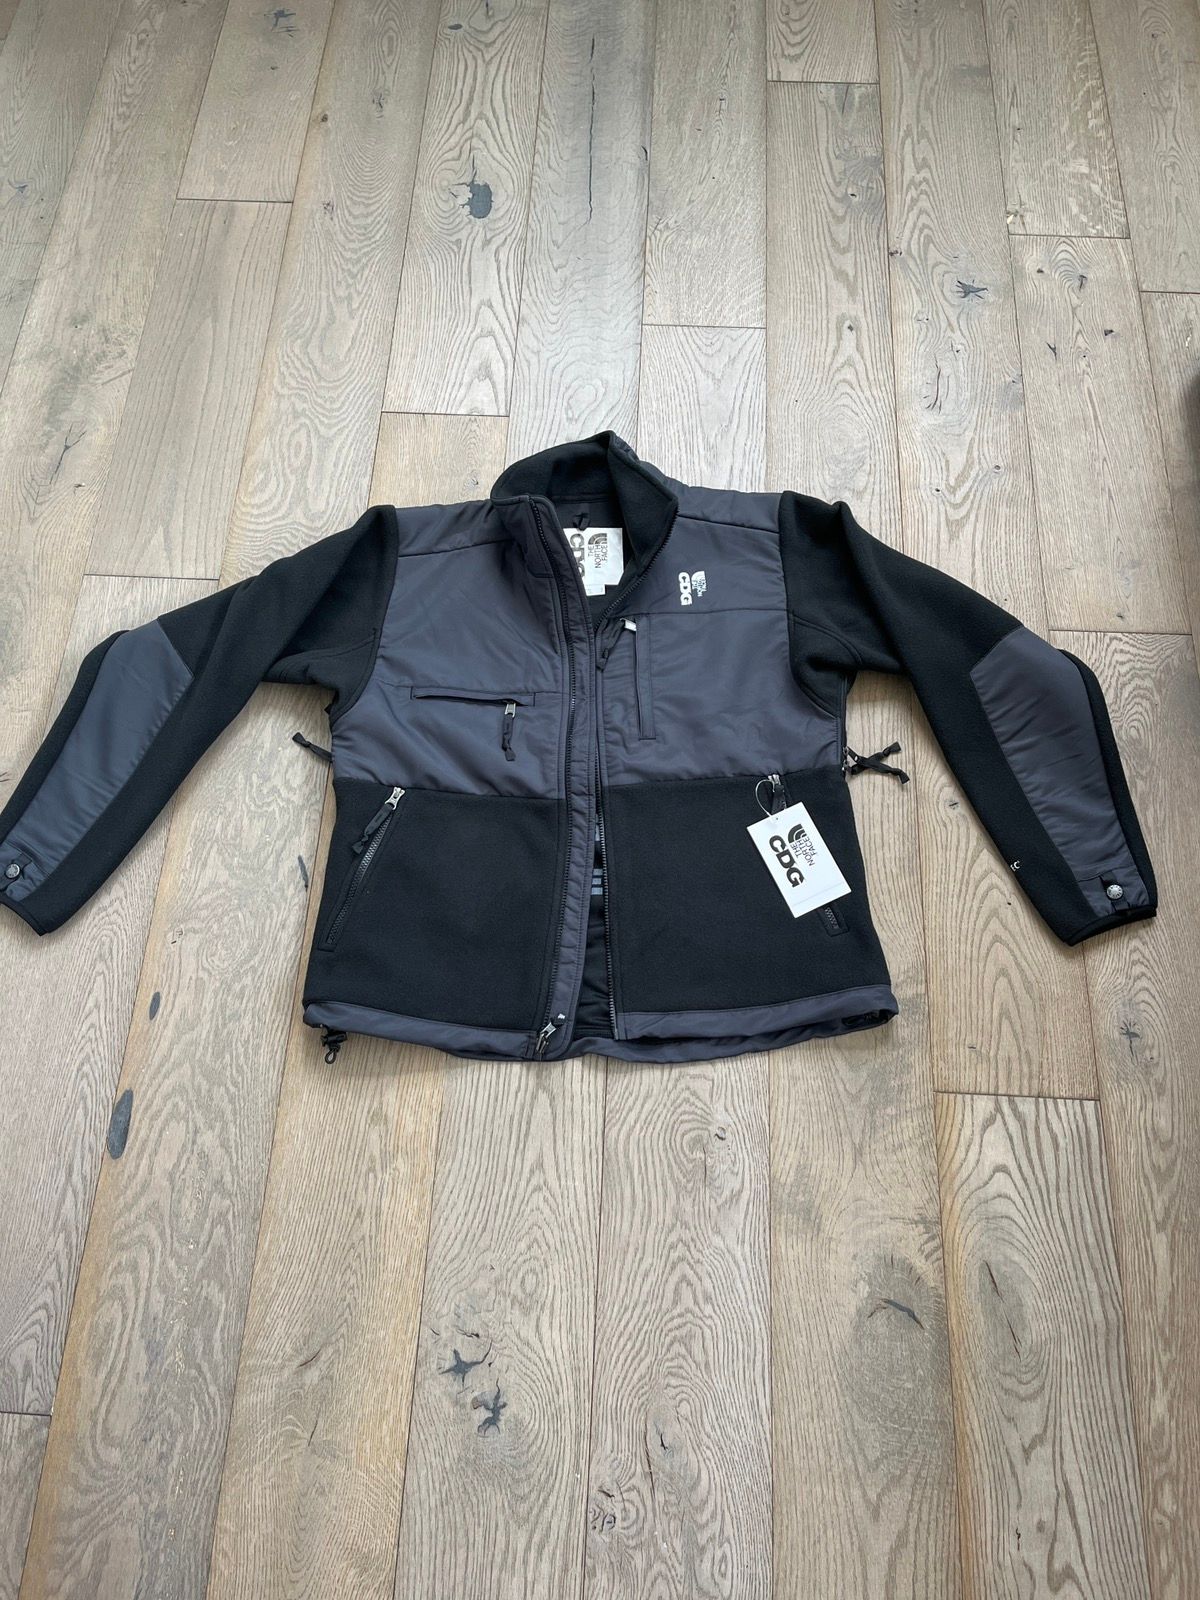 The North Face CDG x The North Face Denali Jacket | Grailed